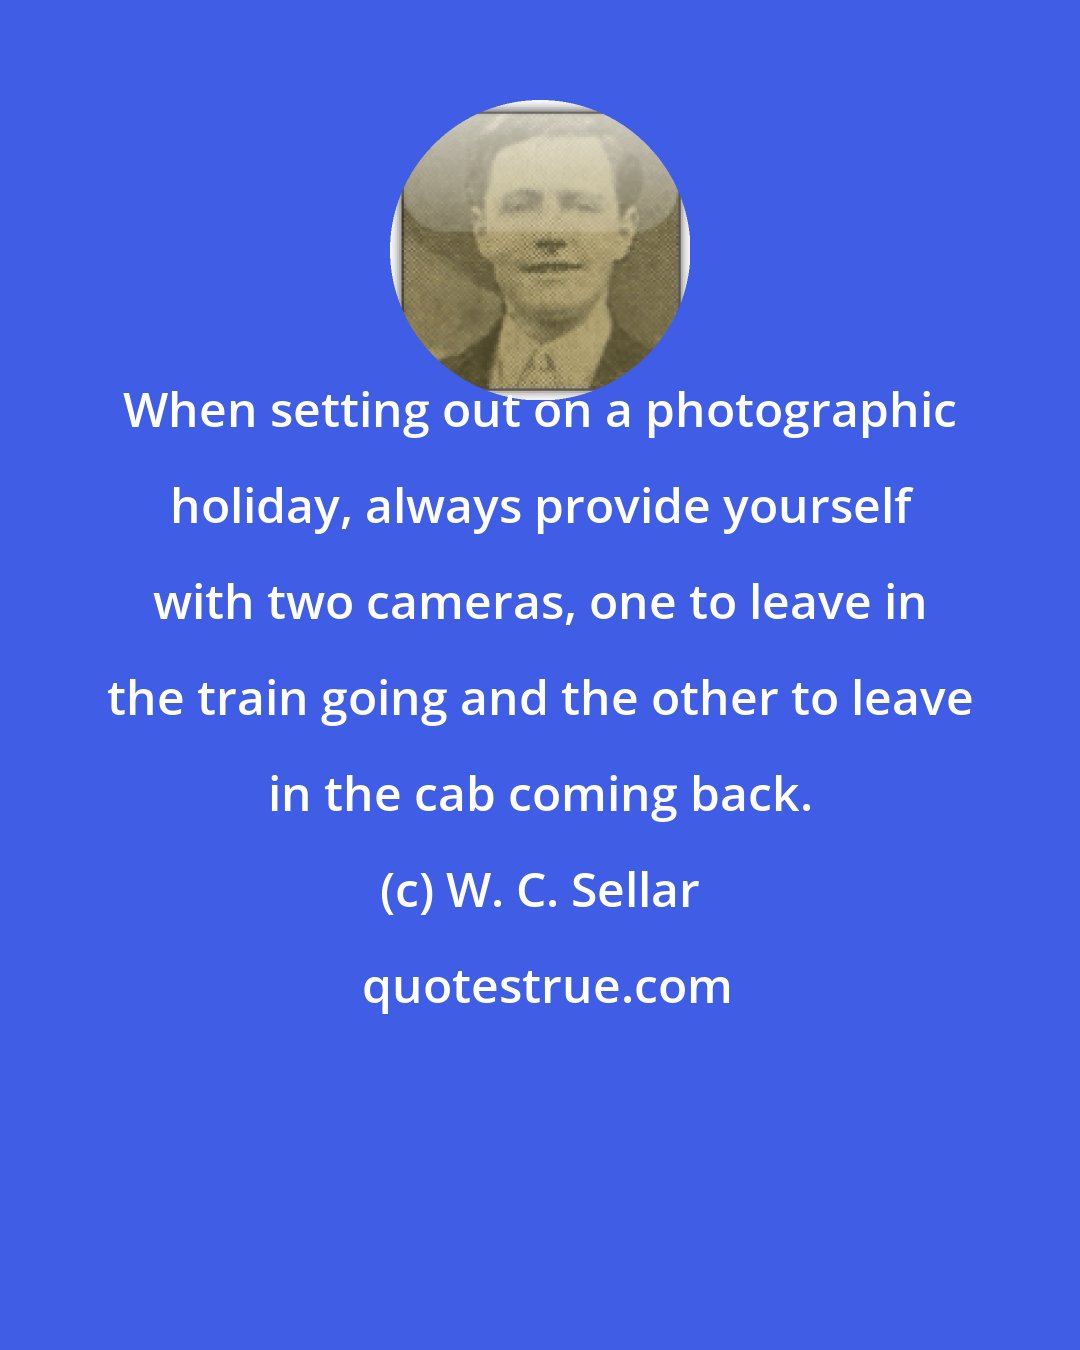 W. C. Sellar: When setting out on a photographic holiday, always provide yourself with two cameras, one to leave in the train going and the other to leave in the cab coming back.